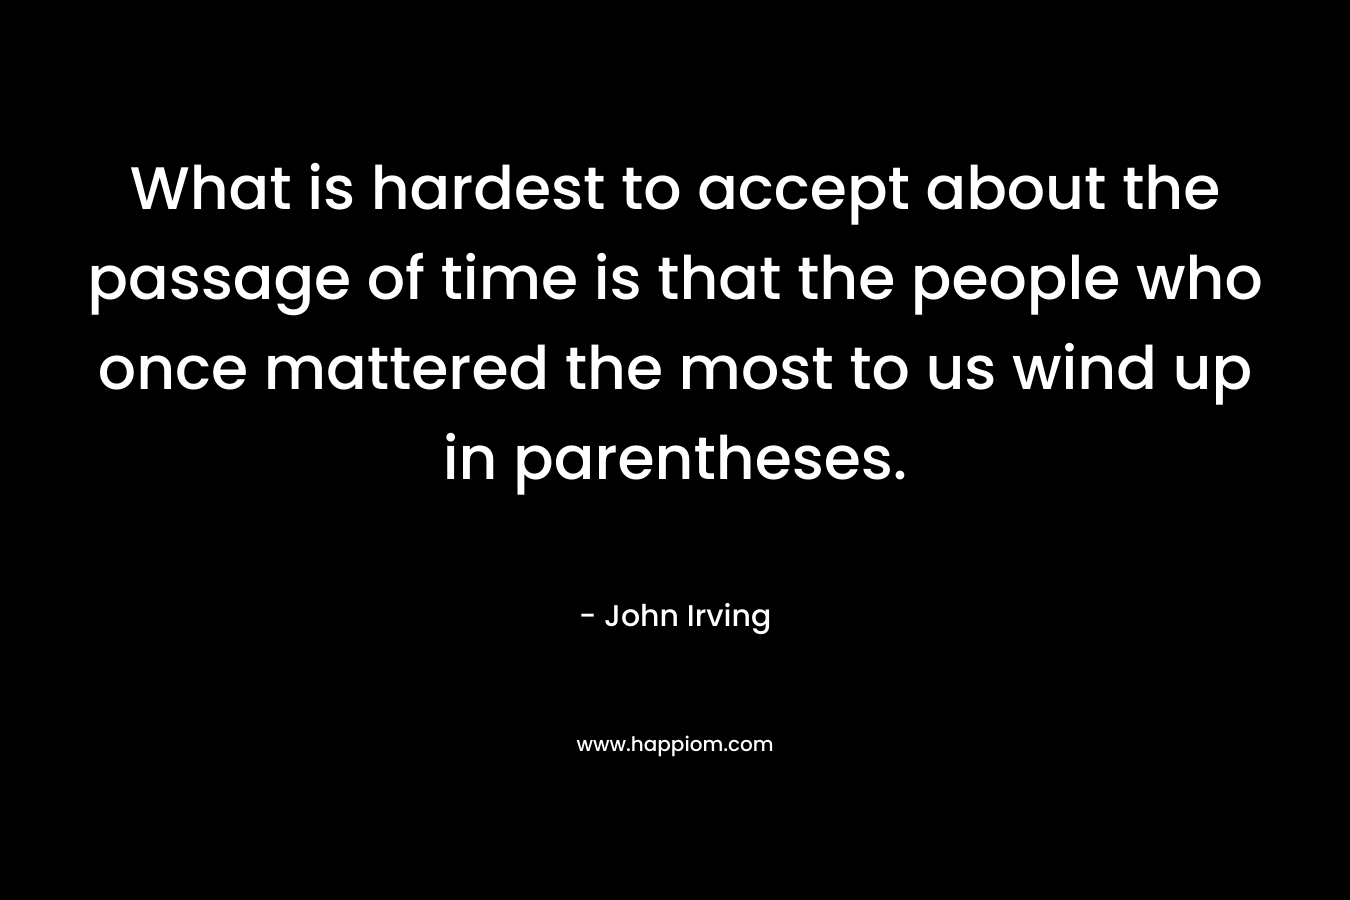 What is hardest to accept about the passage of time is that the people who once mattered the most to us wind up in parentheses. – John Irving